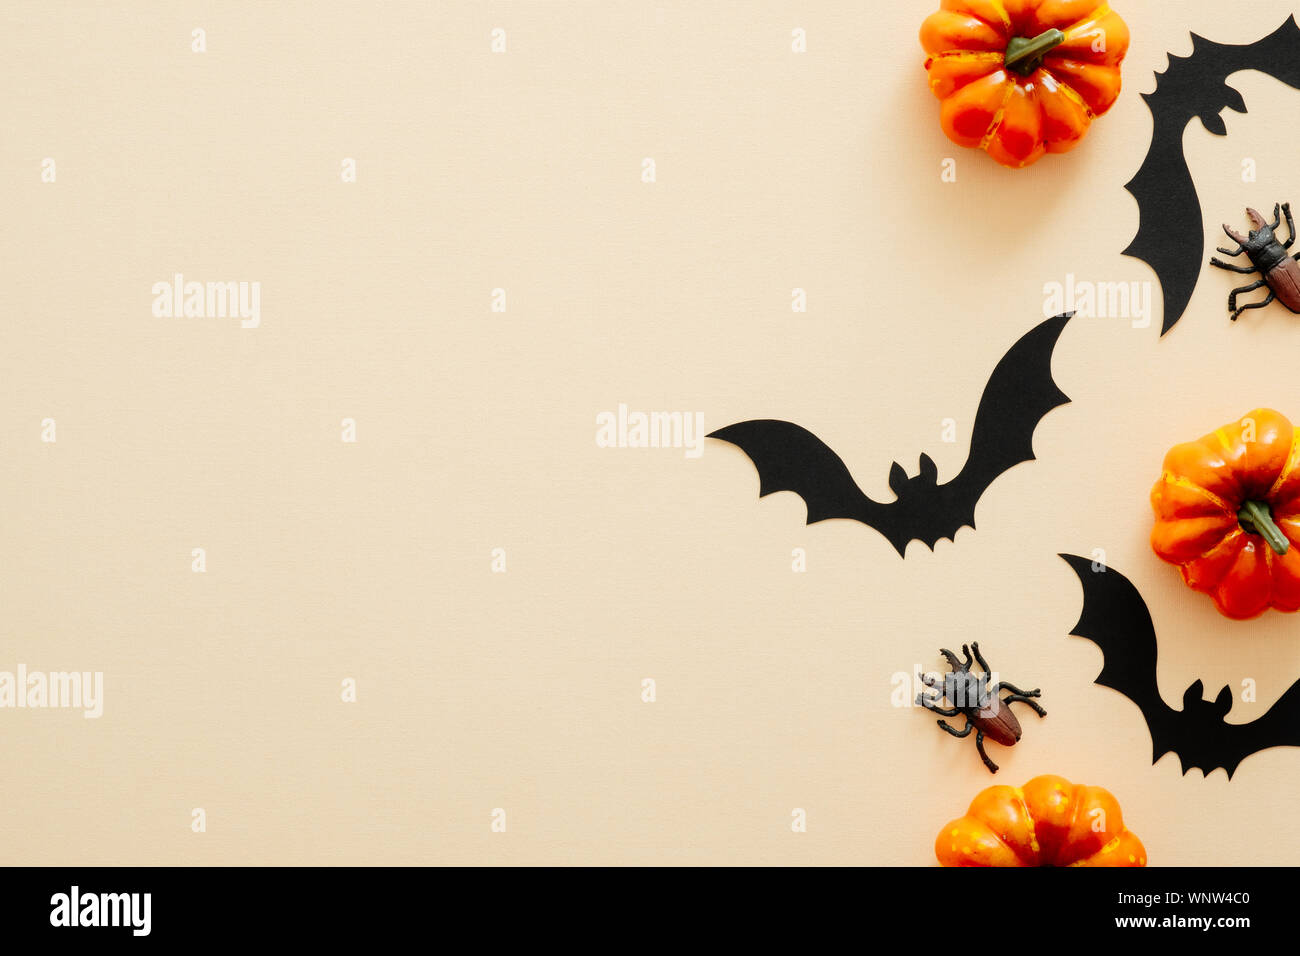 Modern Halloween background with pumpkins, spiders, paper bats with copy space for text. isolated on pastel beige background. Flat lay, top view, over Stock Photo